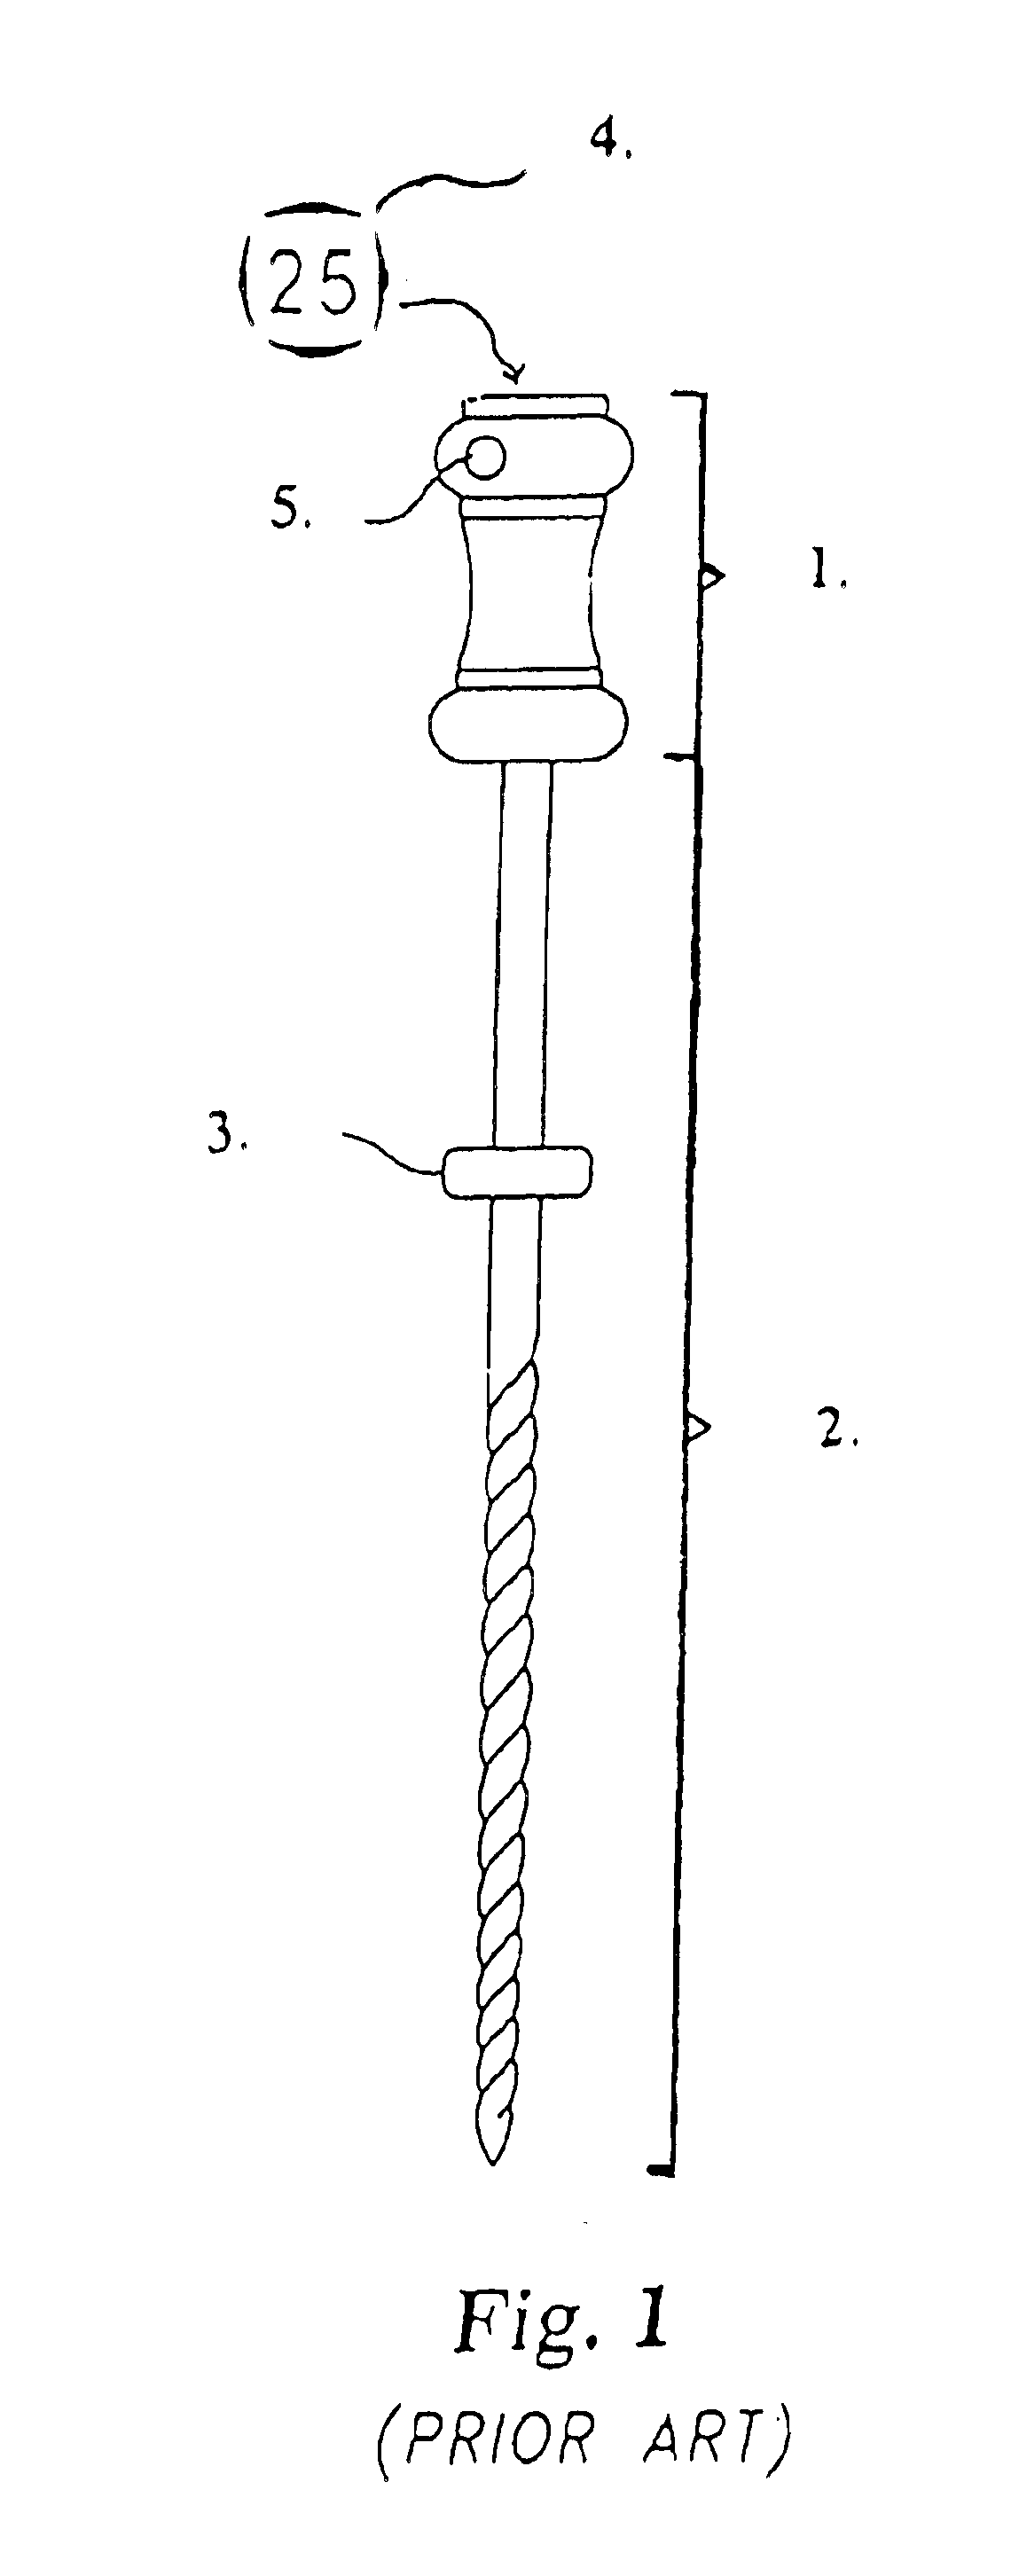 Endodontic file with a metallic conductor as part of the plastic handle to facilitate use of electronic apex locators